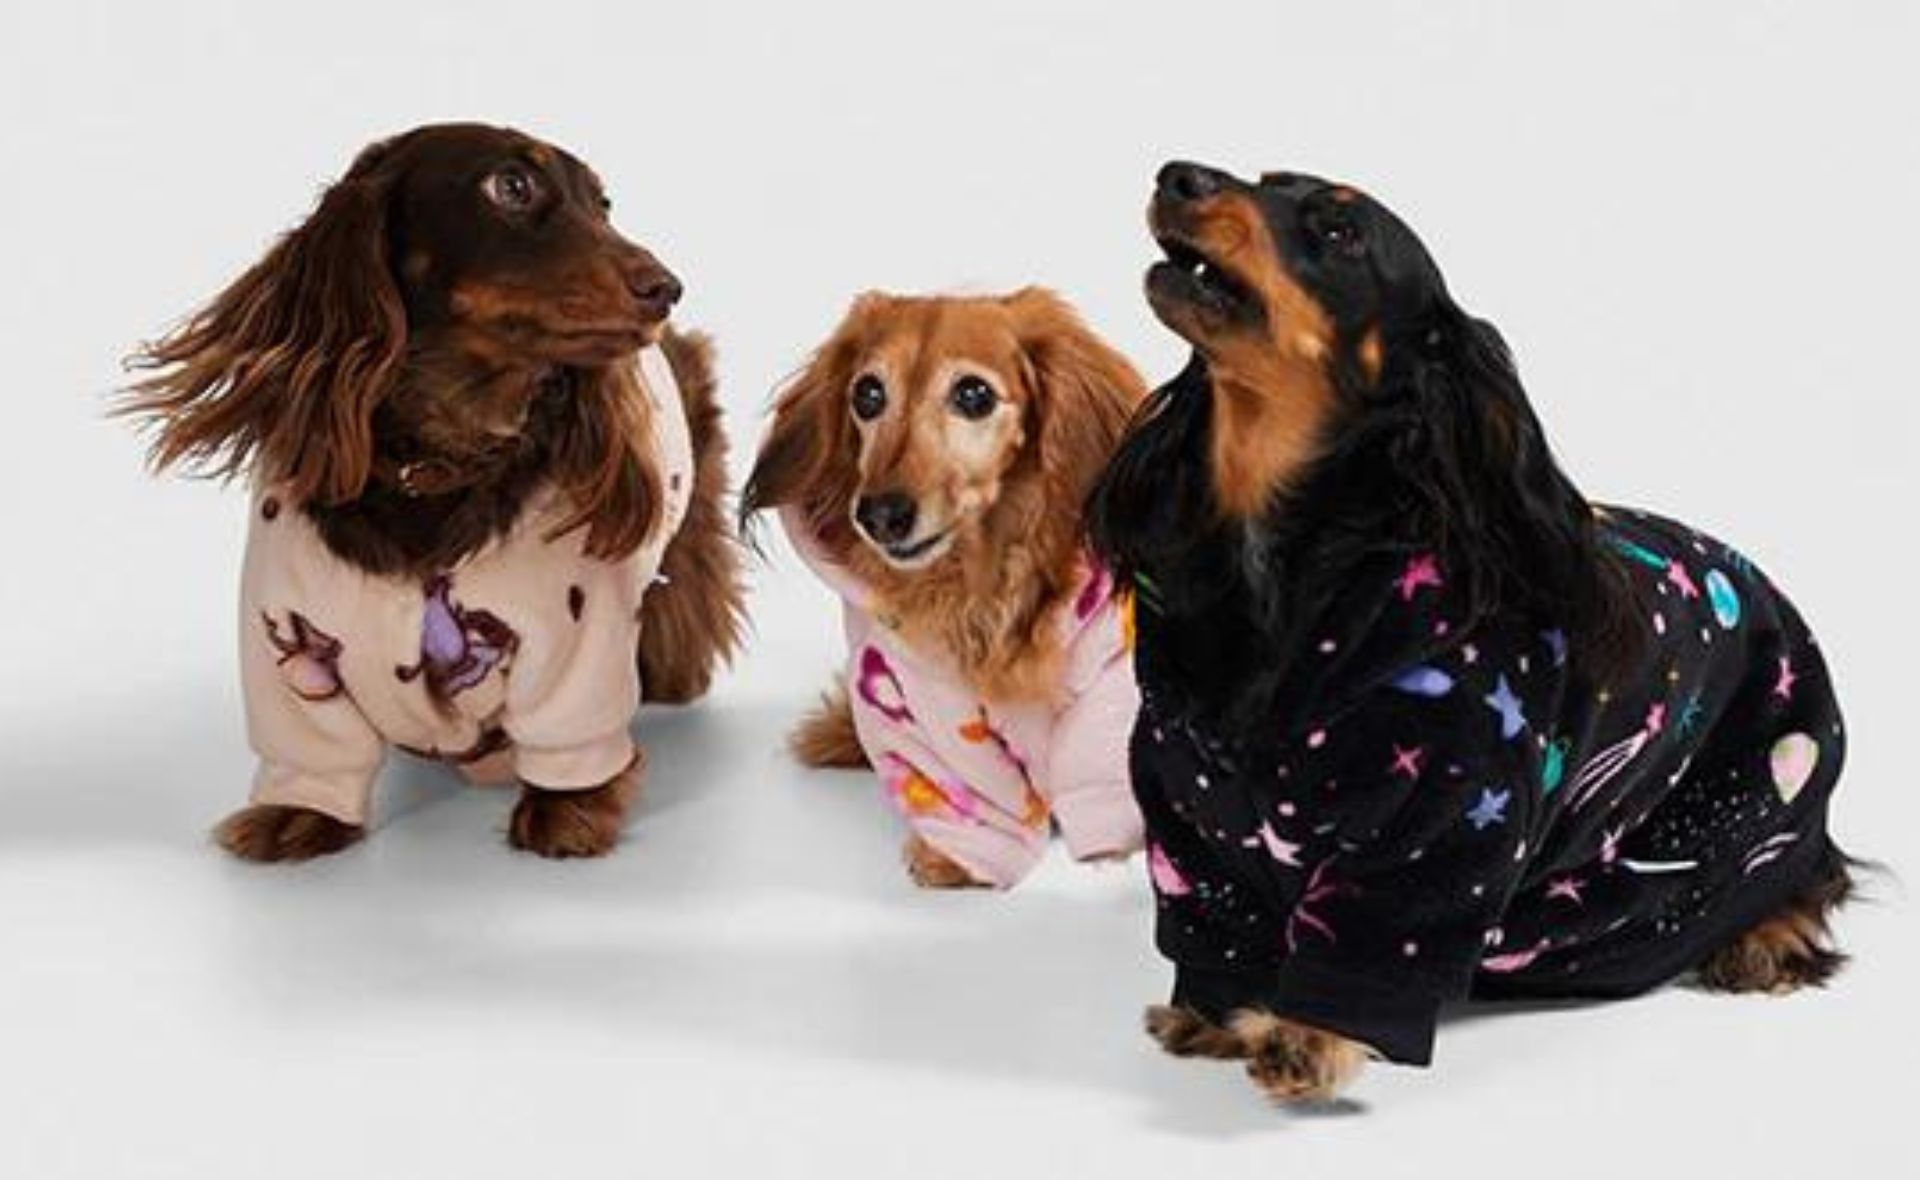 Rug up your furry friends in their very own wearable blankets this winter